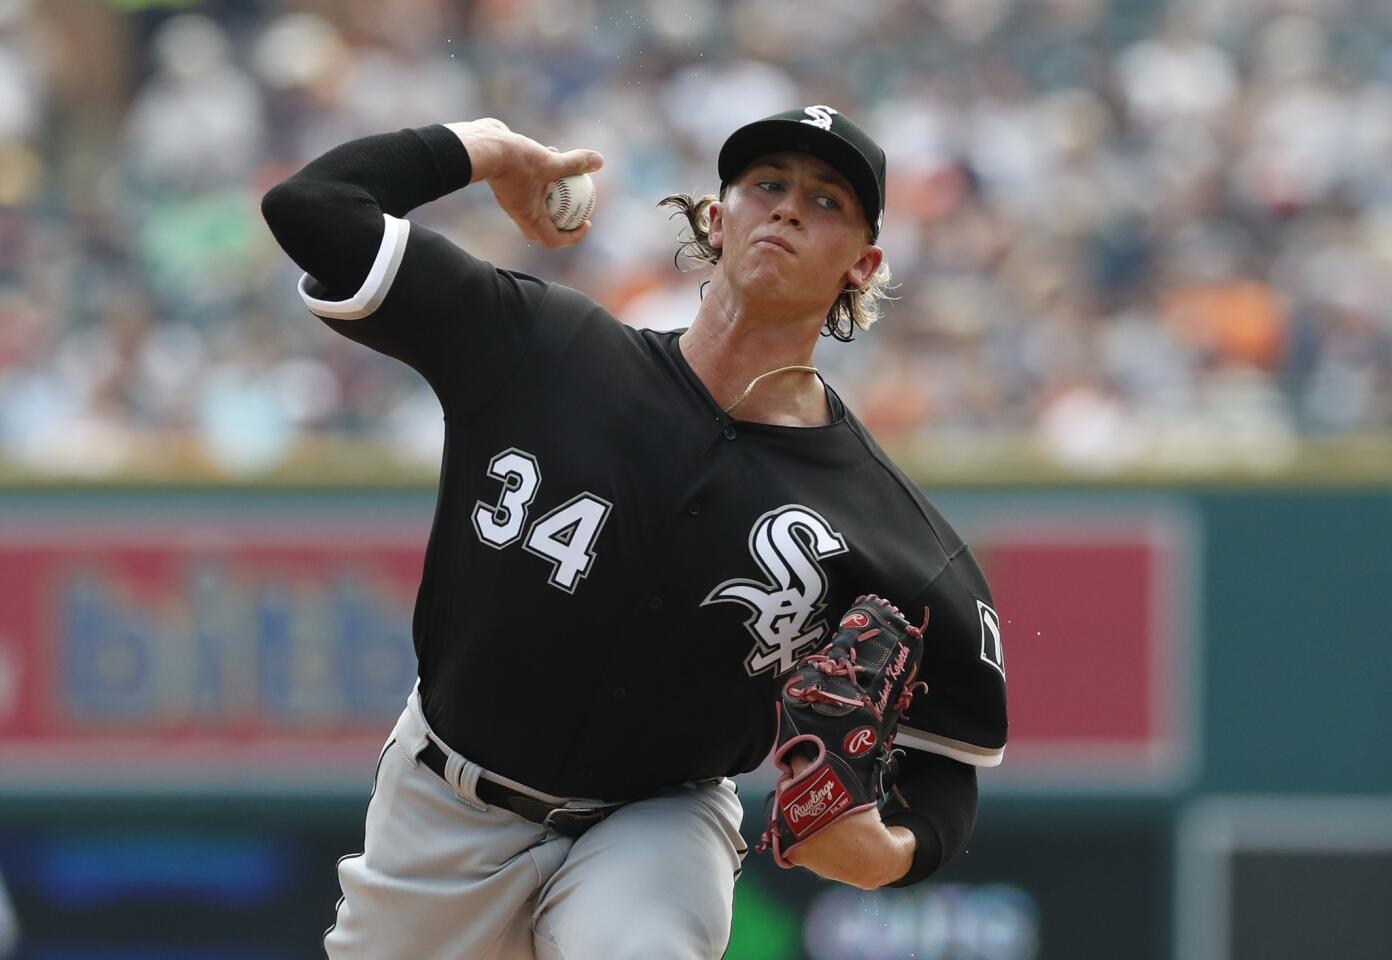 White Sox starter Michael Kopech throws during the second inning against the Tigers, Sunday, Aug. 26, 2018, in Detroit.